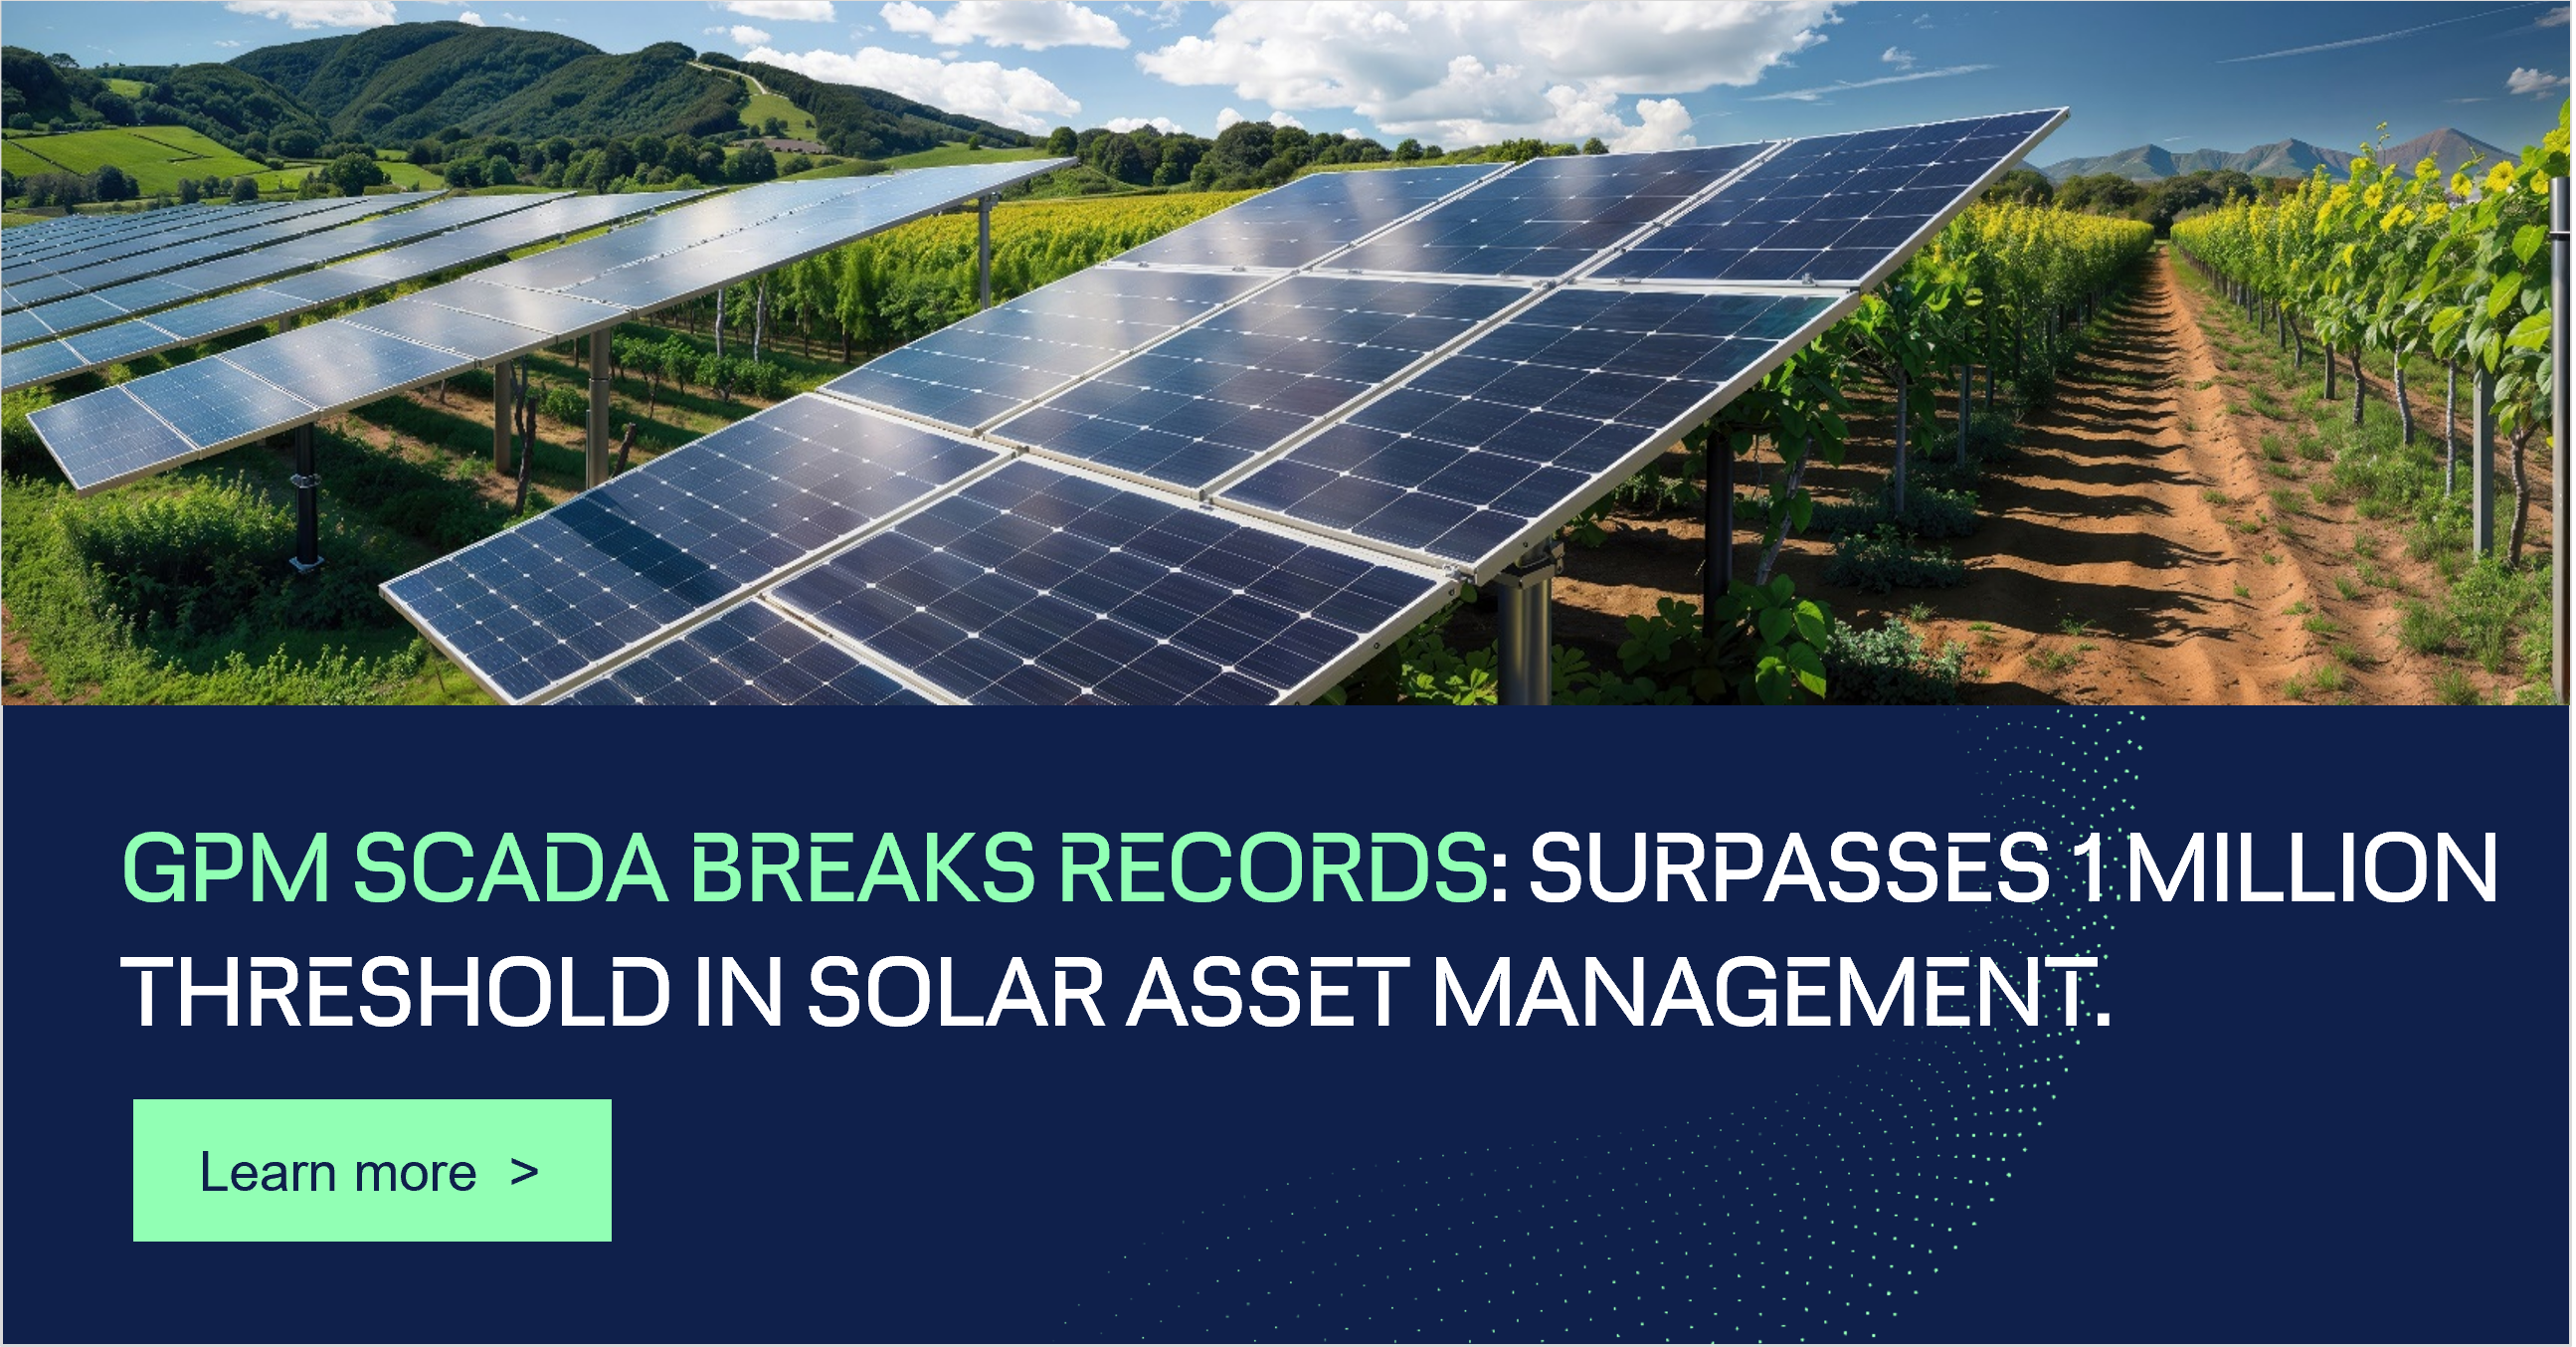 GPM SCADA Sets Record with Over One Million Variables in Solar Asset Management